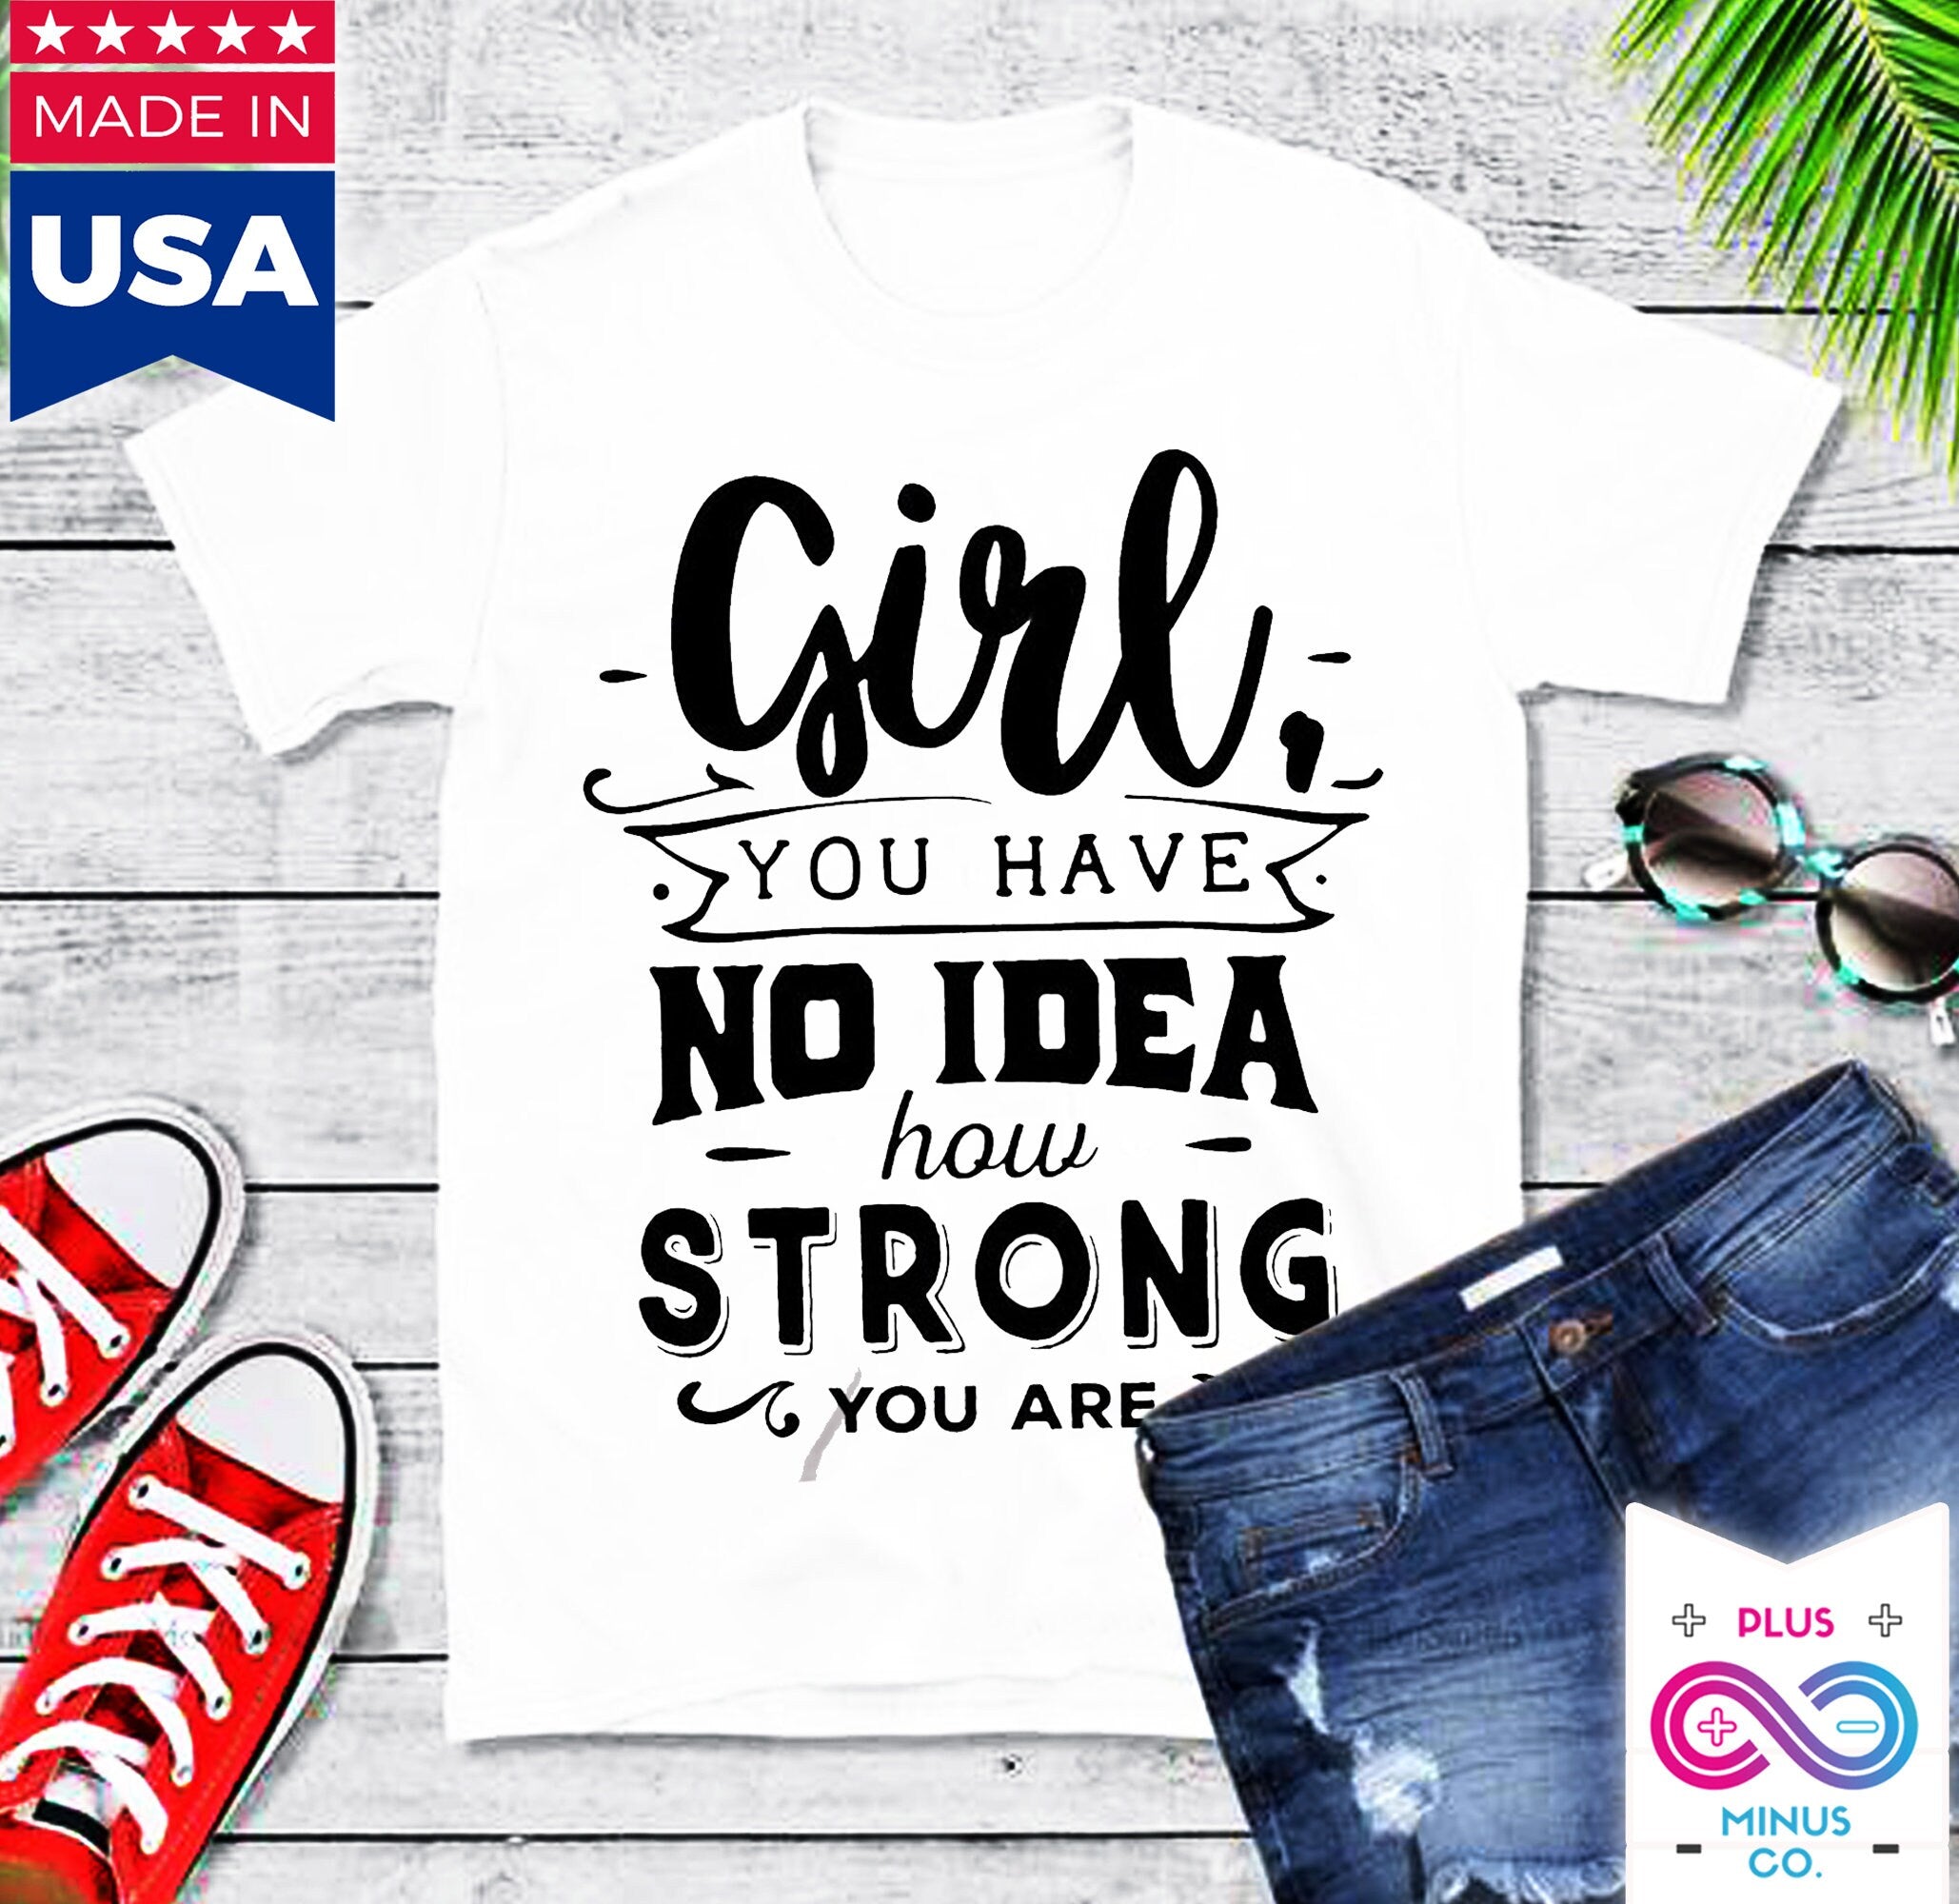 Girl you have no idea how strong you are || Be Strong And Courageous  Girl || Girl Power || Future is Female  T-Shirts - plusminusco.com